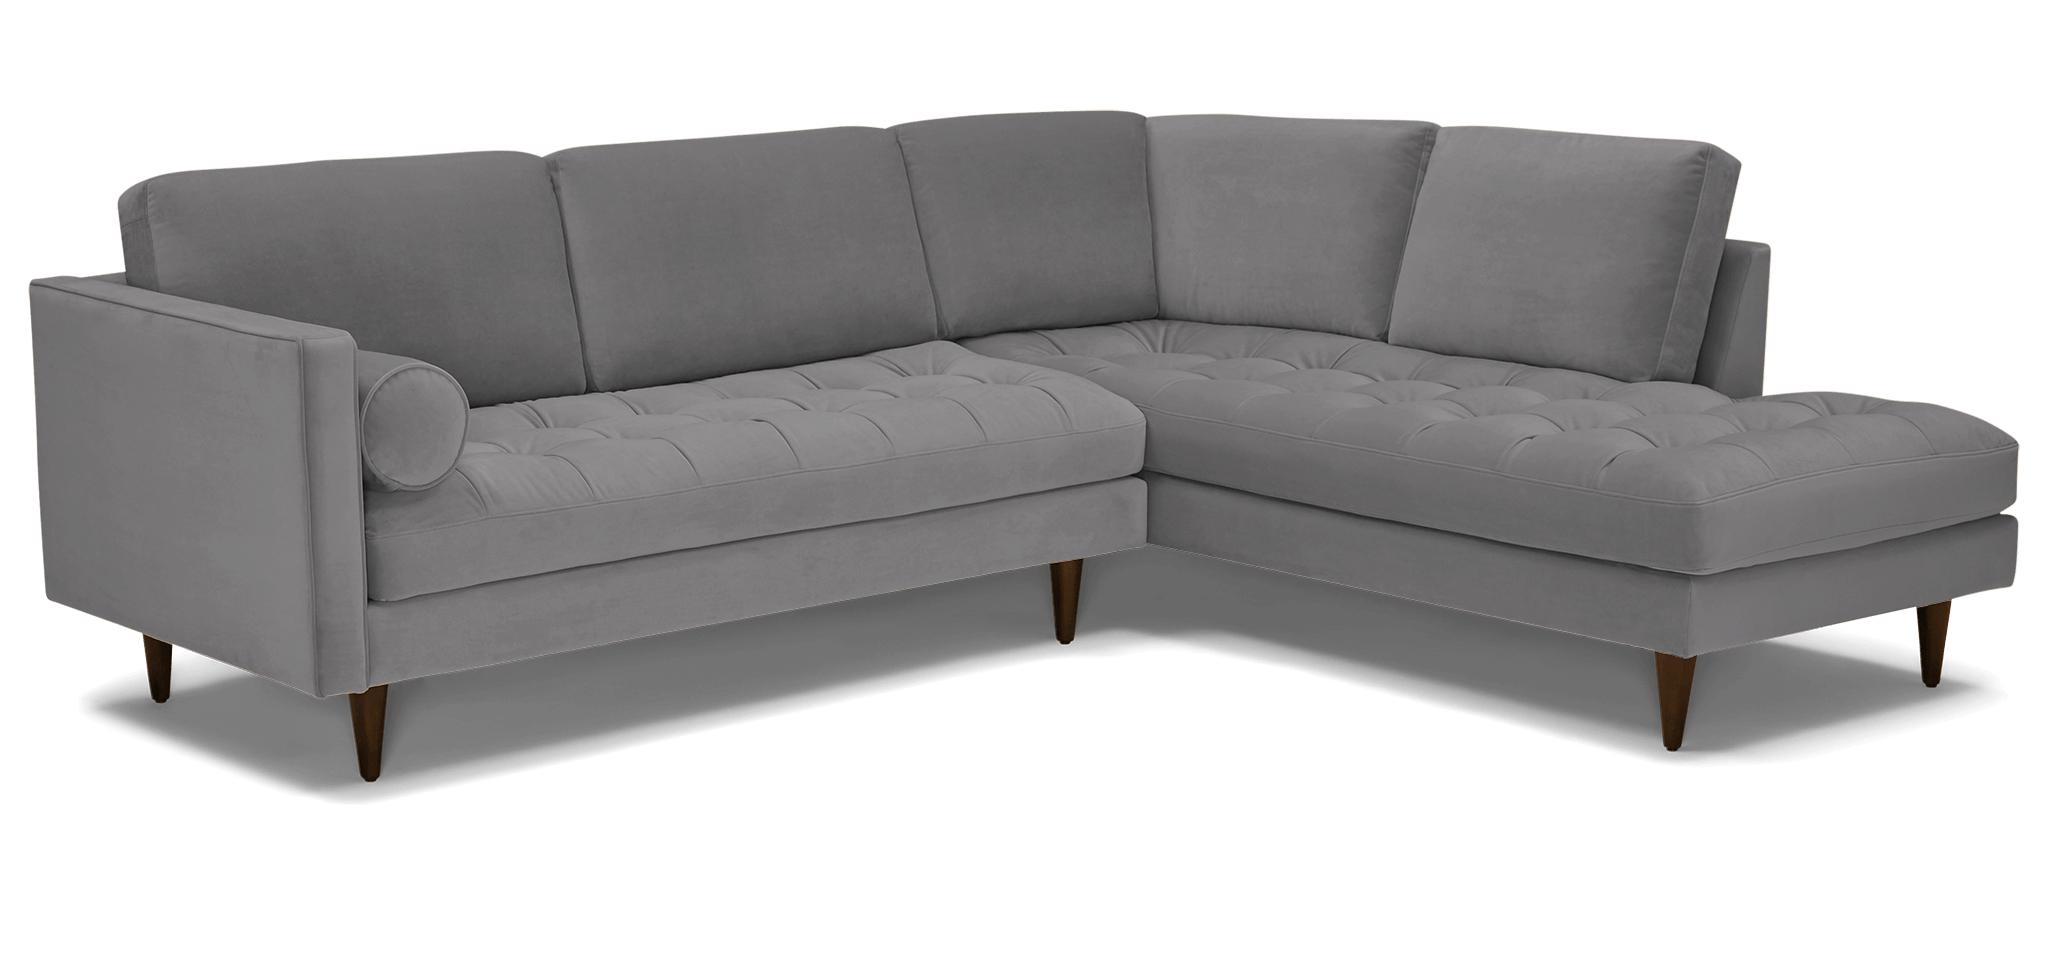 Gray Briar Mid Century Modern Sectional with Bumper - Royale Ash - Mocha - Right  - Image 1